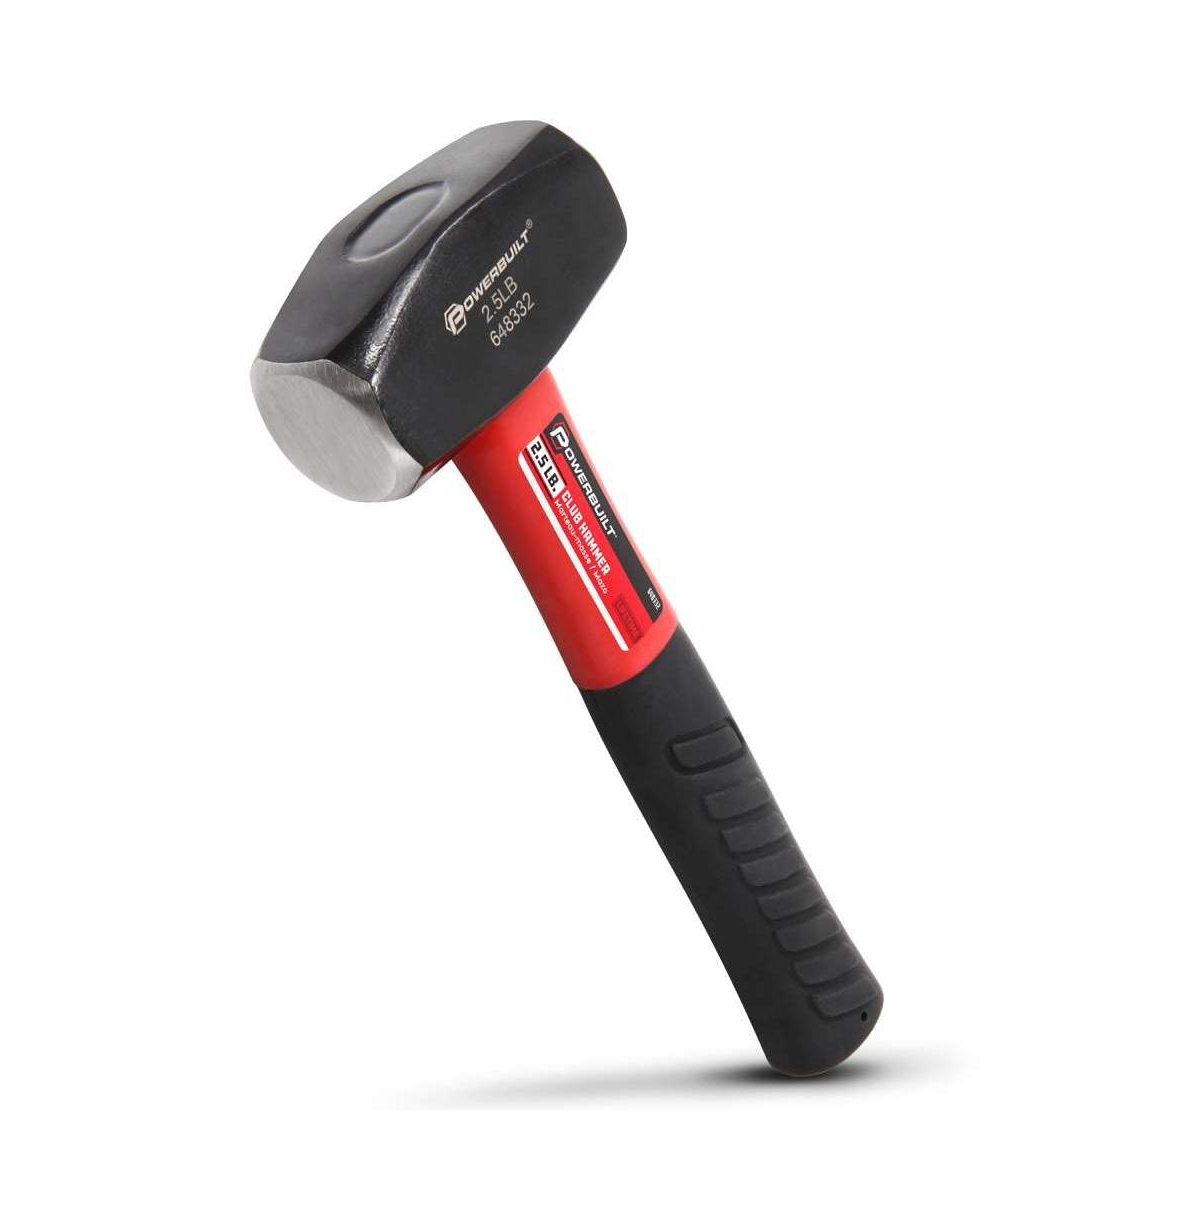 2-1/2 Pound Hand Drilling Sledge Hammer - Red